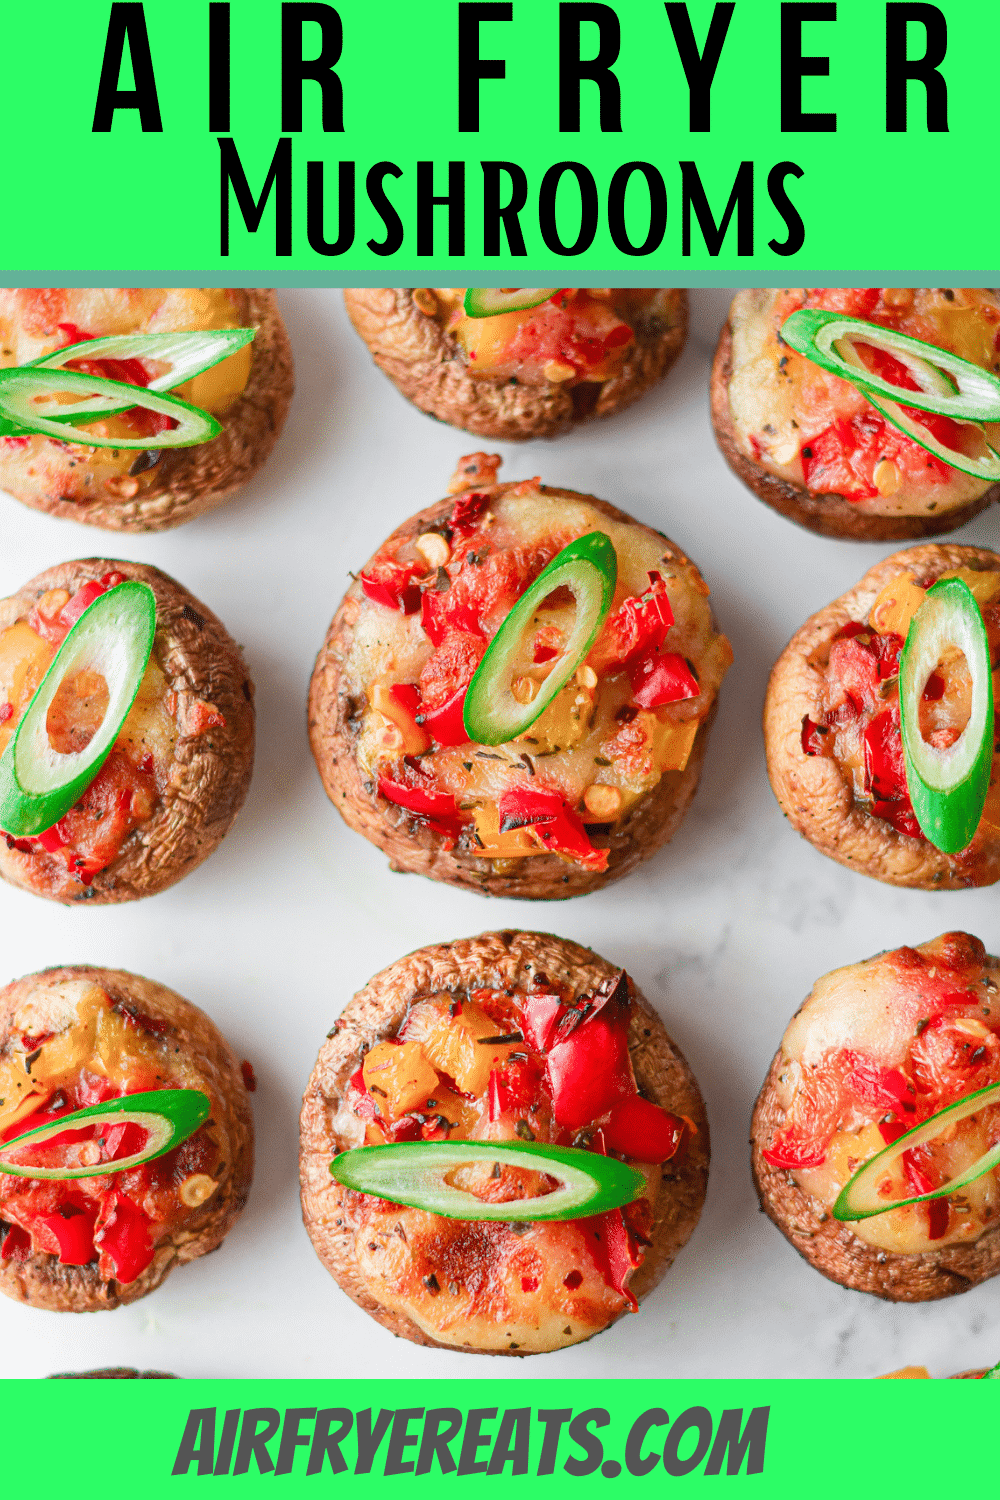 Air Fryer Stuffed Mushrooms are the vegetarian appetizer everyone wants to eat! These yummy stuffed mushroom caps are filled with gooey mozzarella cheese, red and yellow bell peppers, and a delicious Italian seasoning blend. #vegetarianapps #meatlessmonday #stuffedmushrooms via @vegetarianmamma